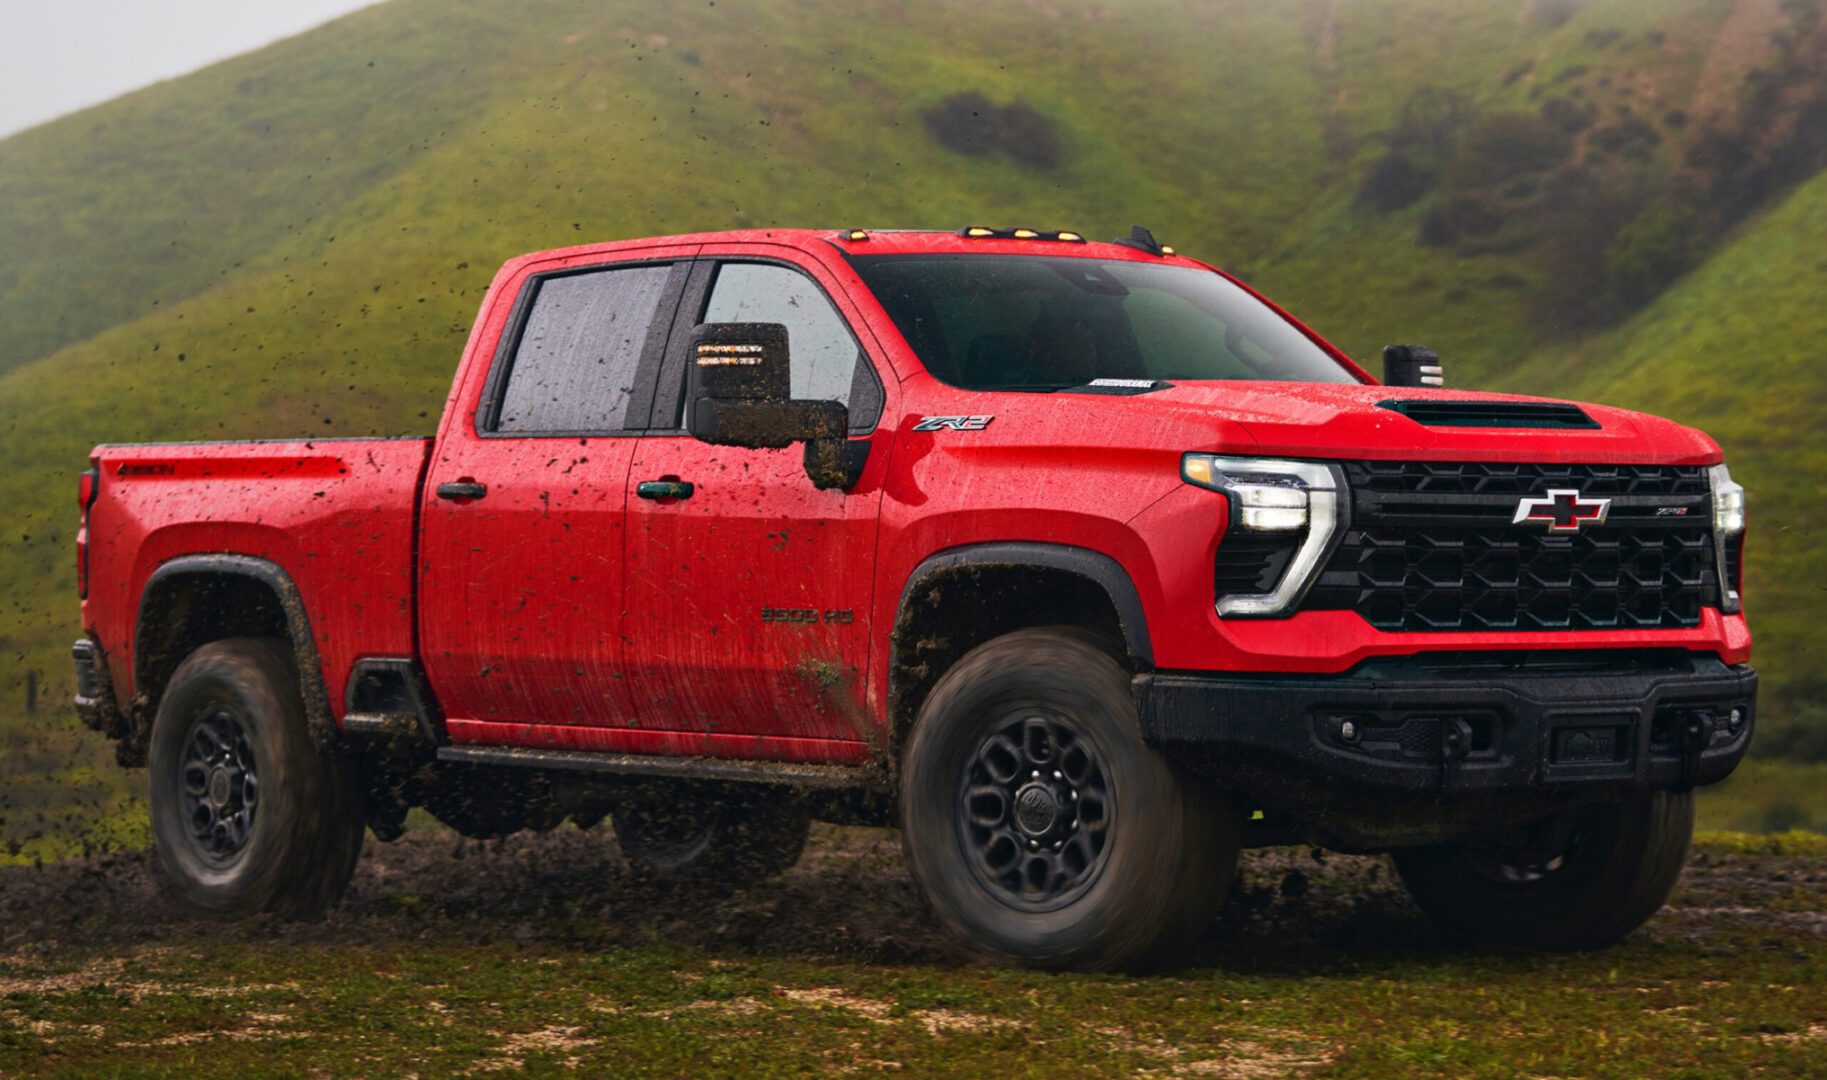 The red 2020 chevrolet silverado is driving through a muddy field.